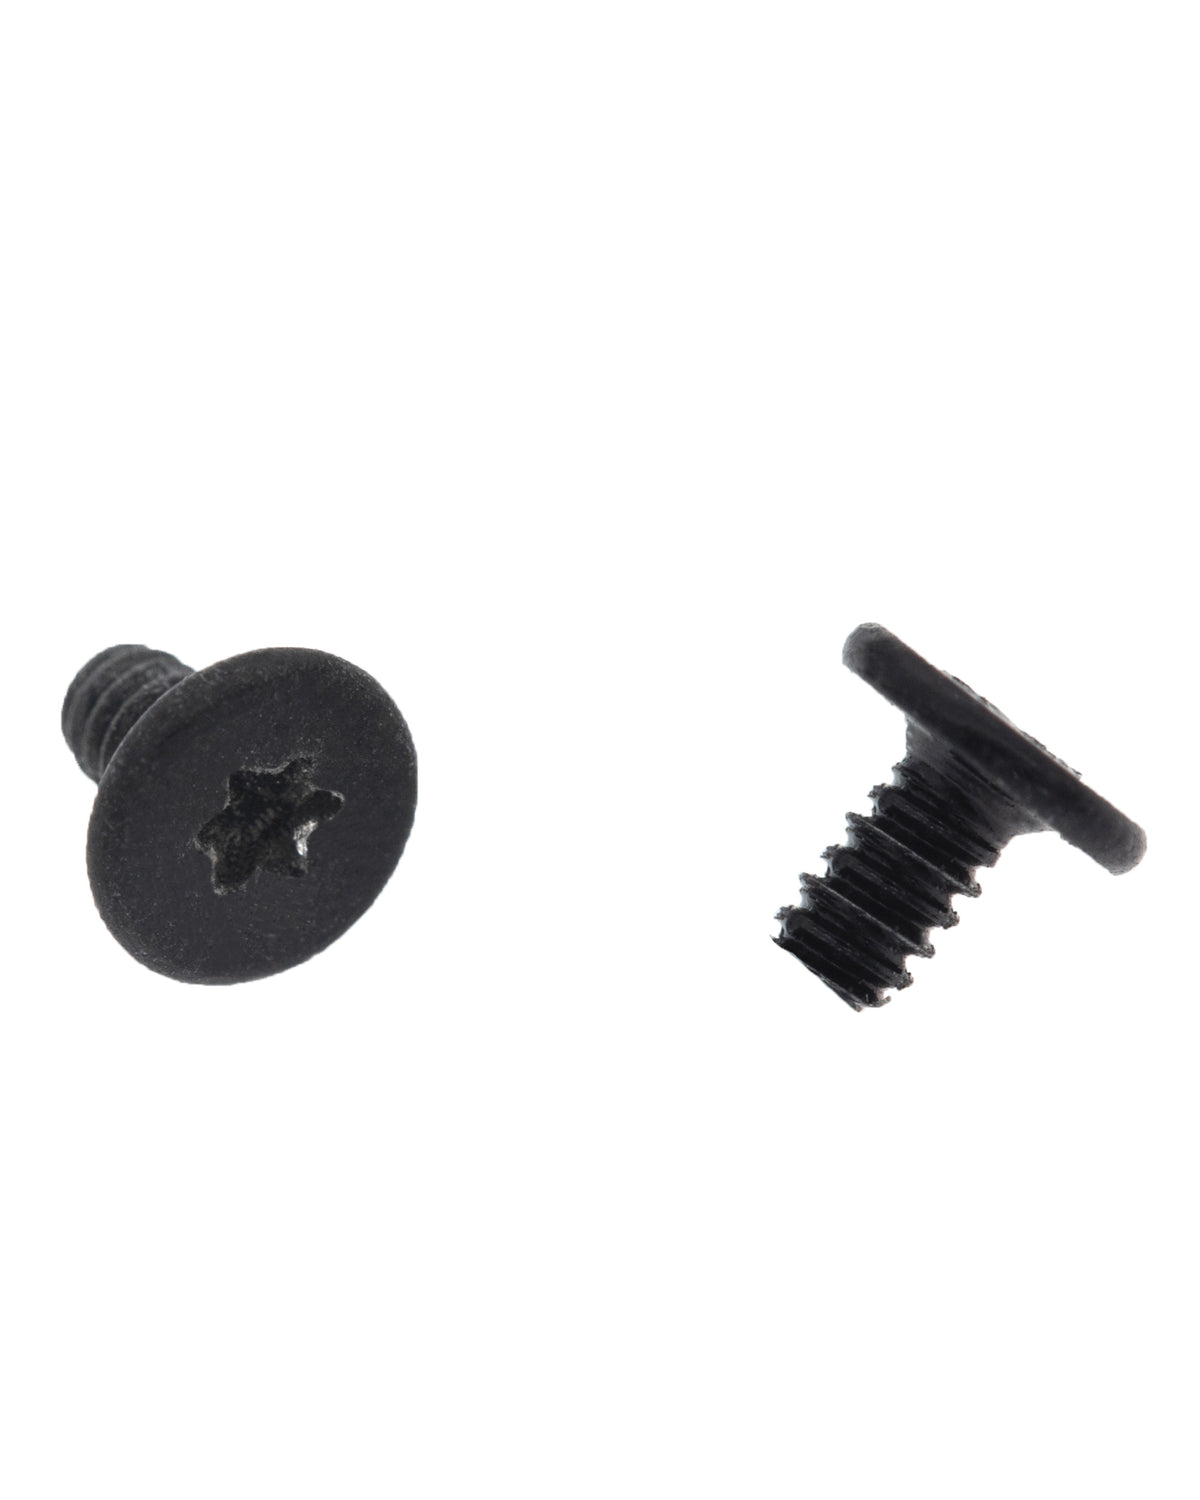 MAGSAFE BOARD SCREWS - TORX T5 (2 PIECE SET) FOR MACBOOK PRO RETINA 15" A1398 (EARLY 2013 / MID 2012 / LATE 2013 / MID 2014 / MID 2015)